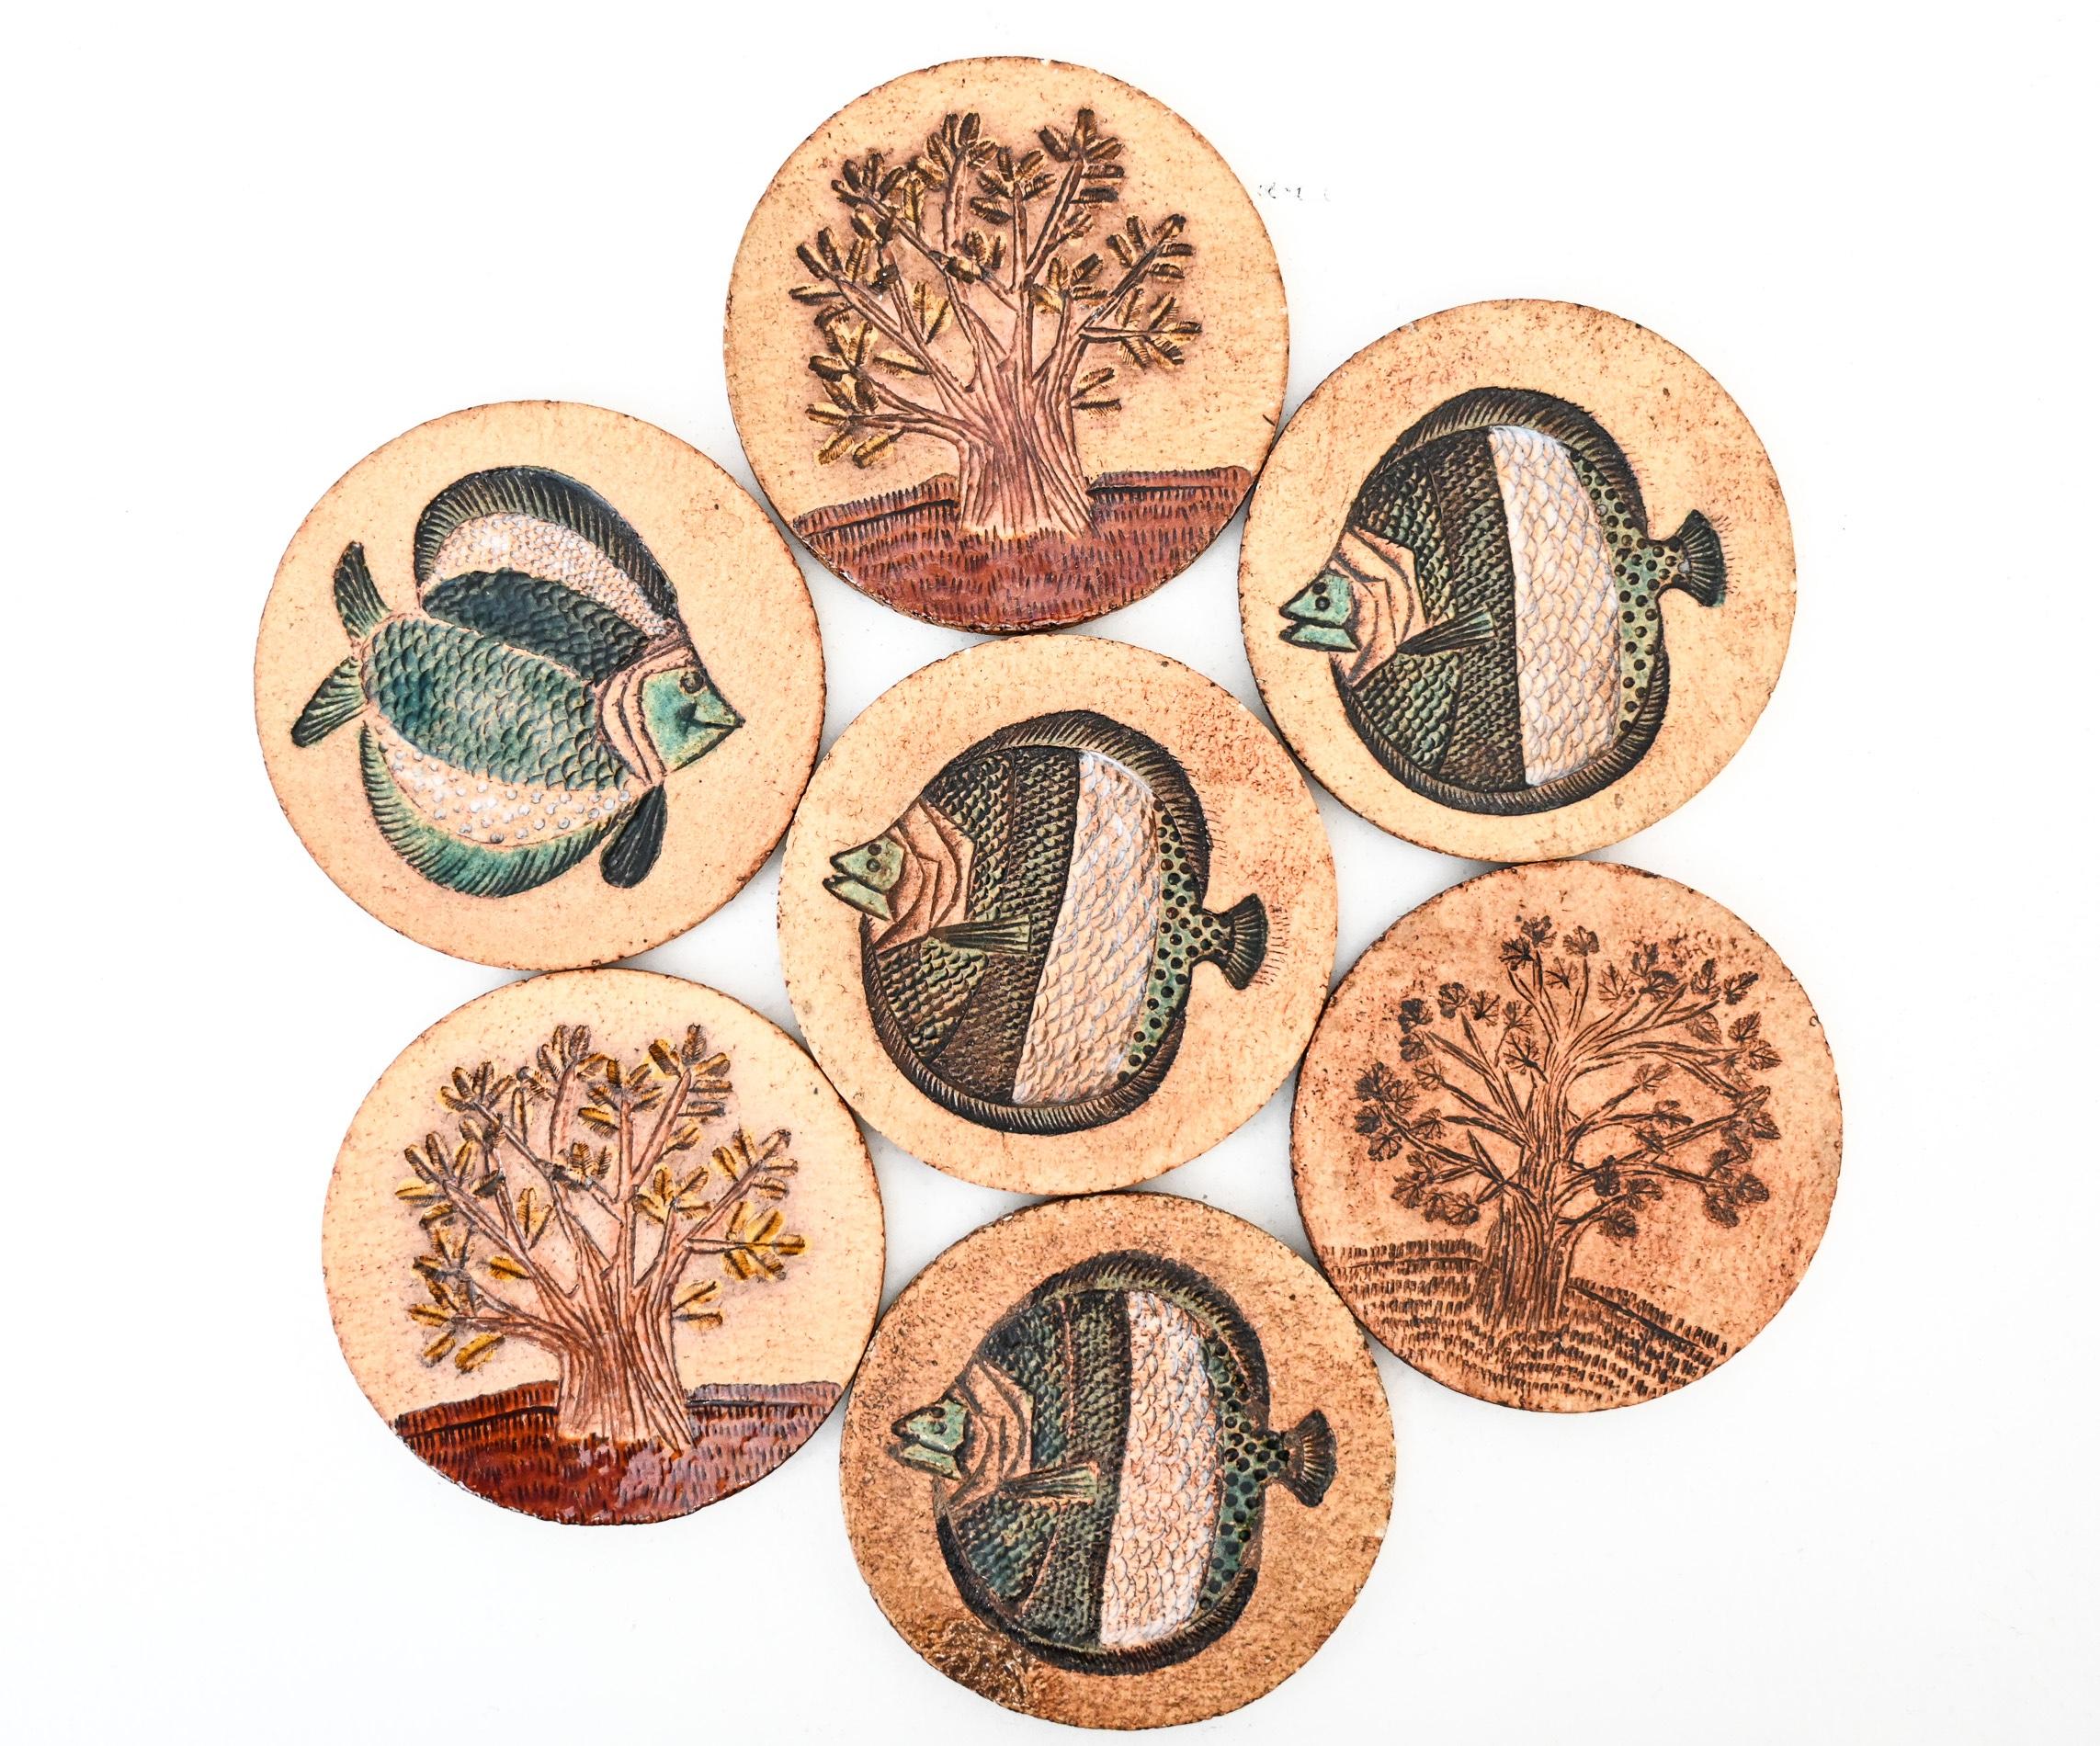 A matched set of earthenware drinks coasters by Roger Capron
with incised and coloured decoration depicting trees and fishes.

Stamped signatures to the reverse

Vallauris, France, circa 1970

(priced for the set)

Measures: 11.5cm diameter